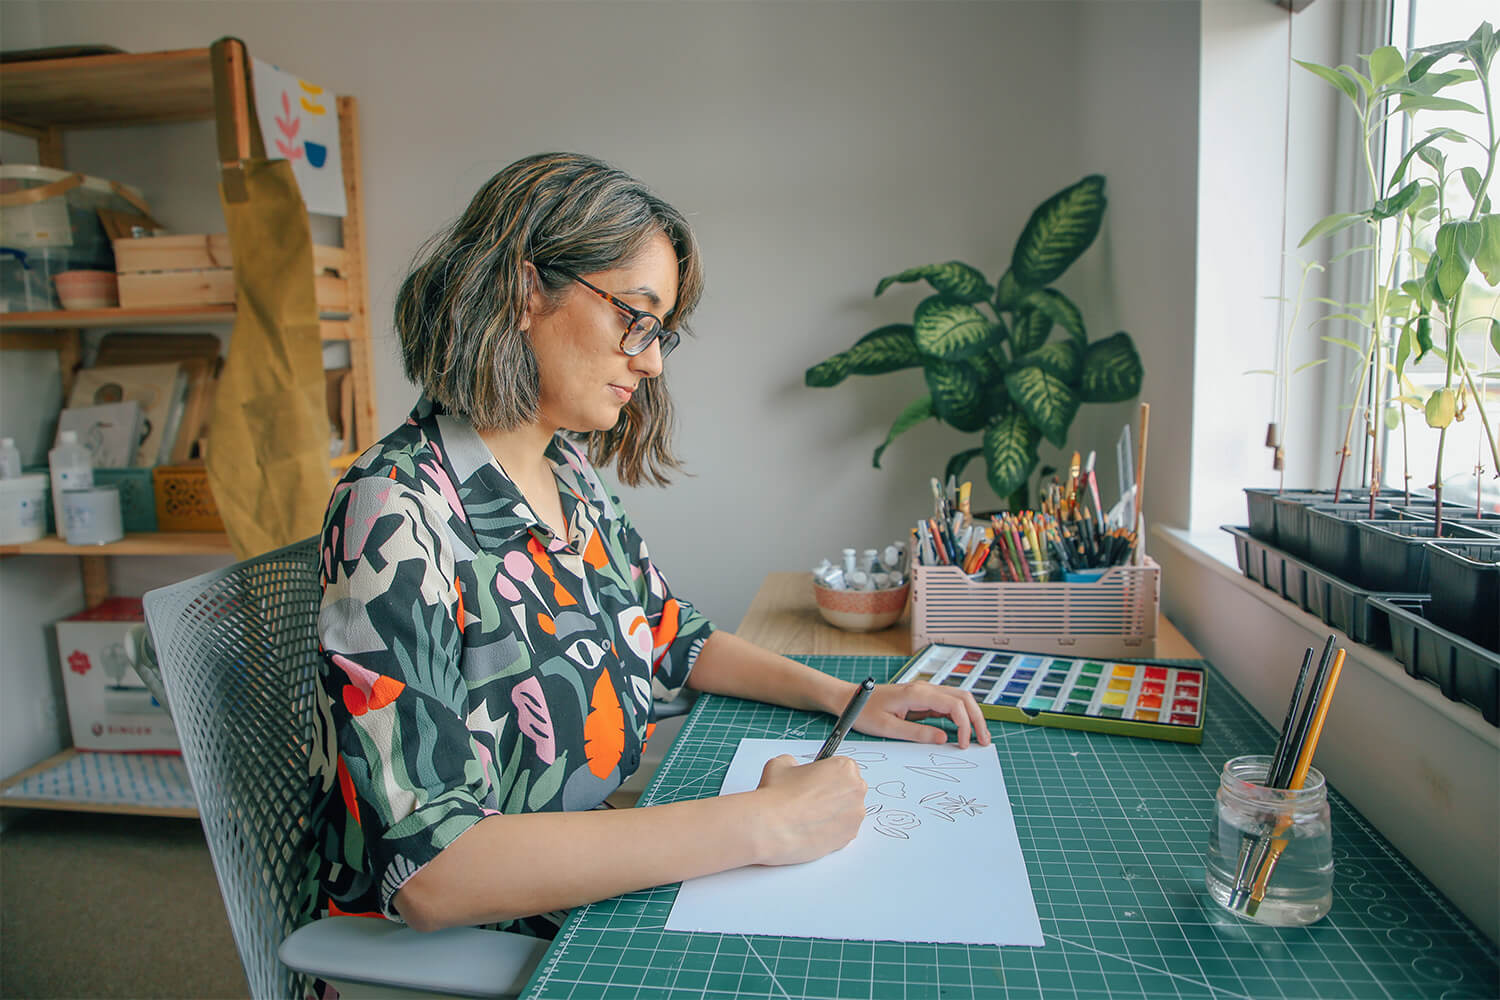 Illustrator and maker Taaryn Brench's designing inside her colourful studio